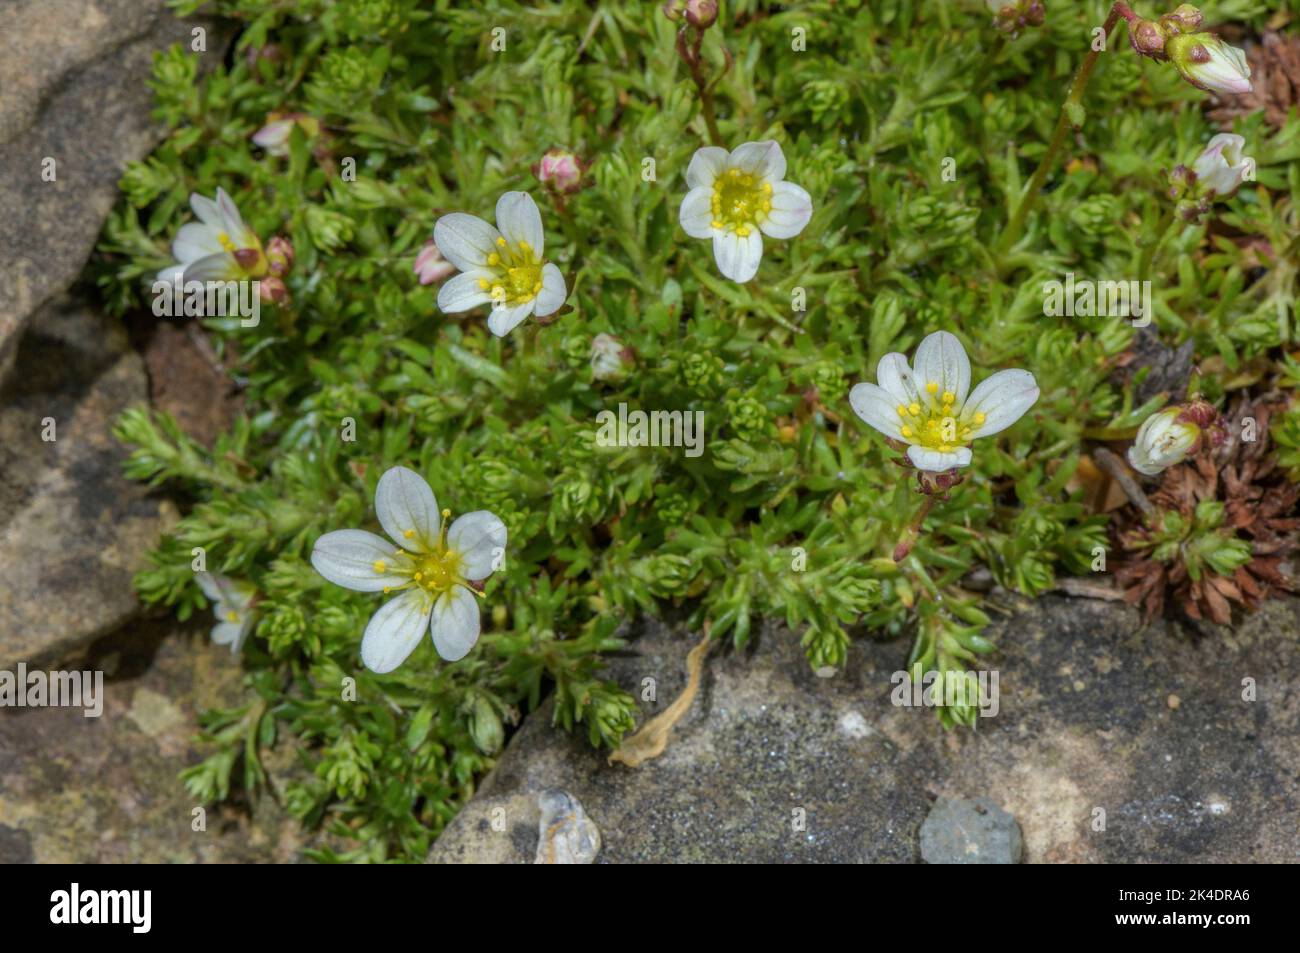 Mossy Saxifrage or Dovedale Moss, Saxifraga hypnoides in flower. Stock Photo